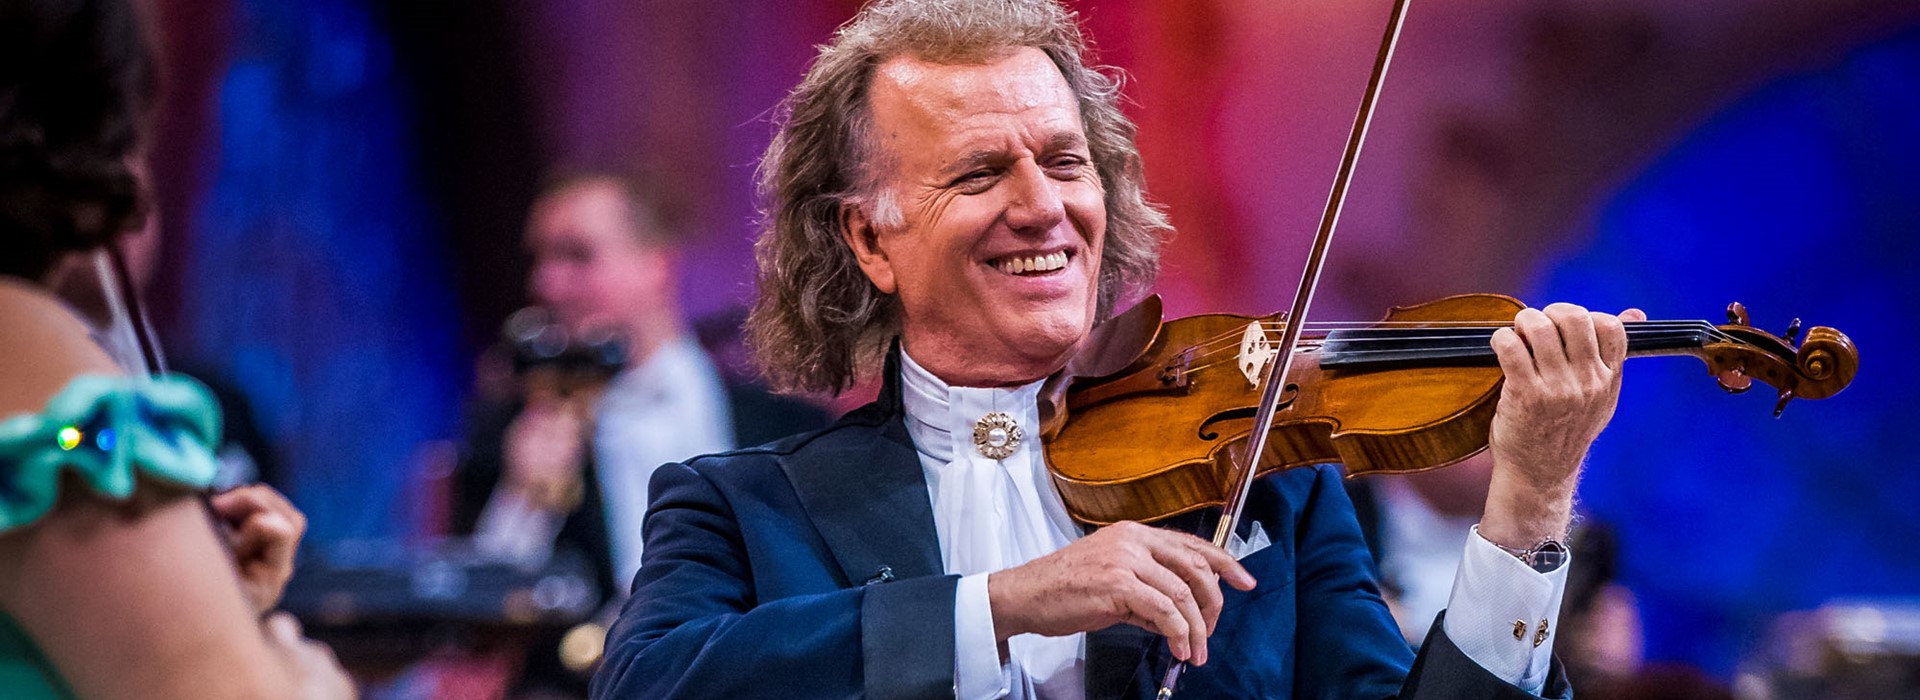 tourhub | Newmarket Holidays | Andre Rieu, 4 days in Liverpool 